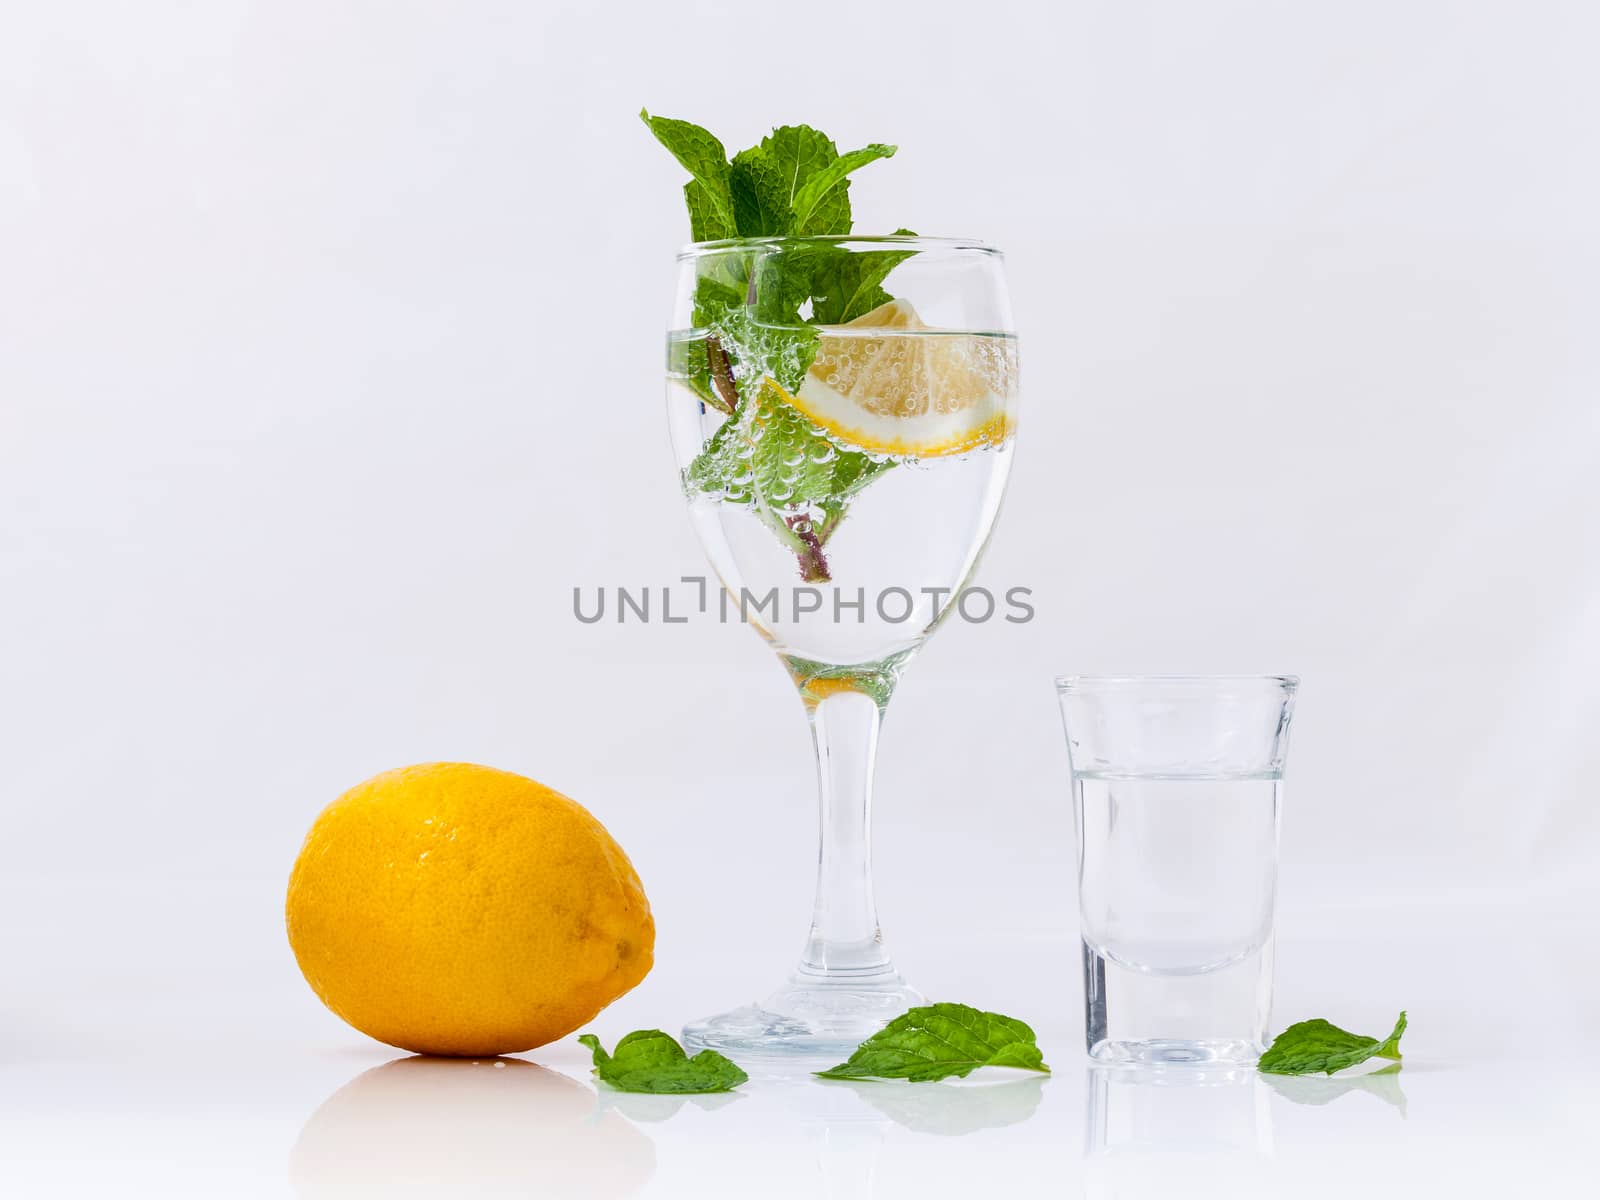 Mojito cocktail with fresh mint leaves isolate  on white backgro by kerdkanno